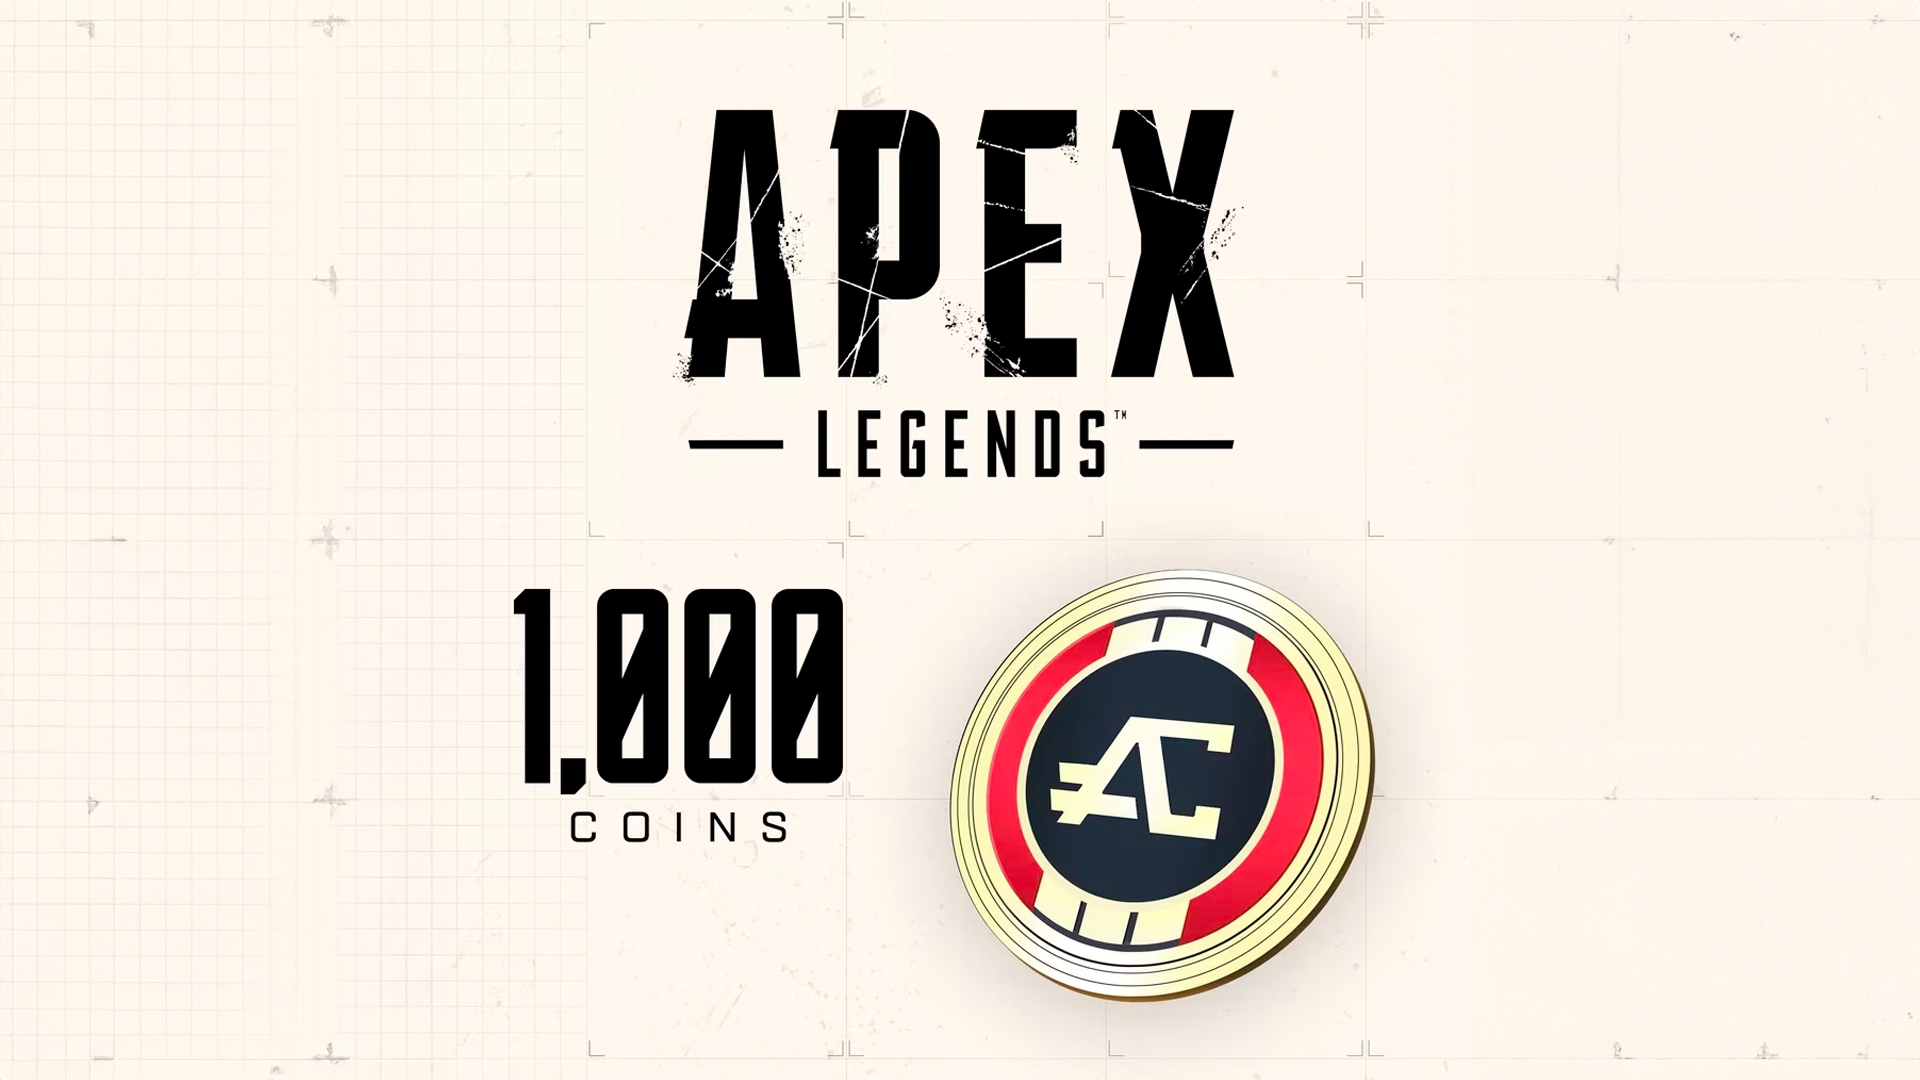 BirnoOCE on X: 🎉APEX COIN GIVEAWAY🎉 Best Banner/Player Card Wins!*  Prizes: Best over all - 1,000 Apex Coins Best Wattson one - 1,000 Apex  Coins - Post all entries in the replies! 